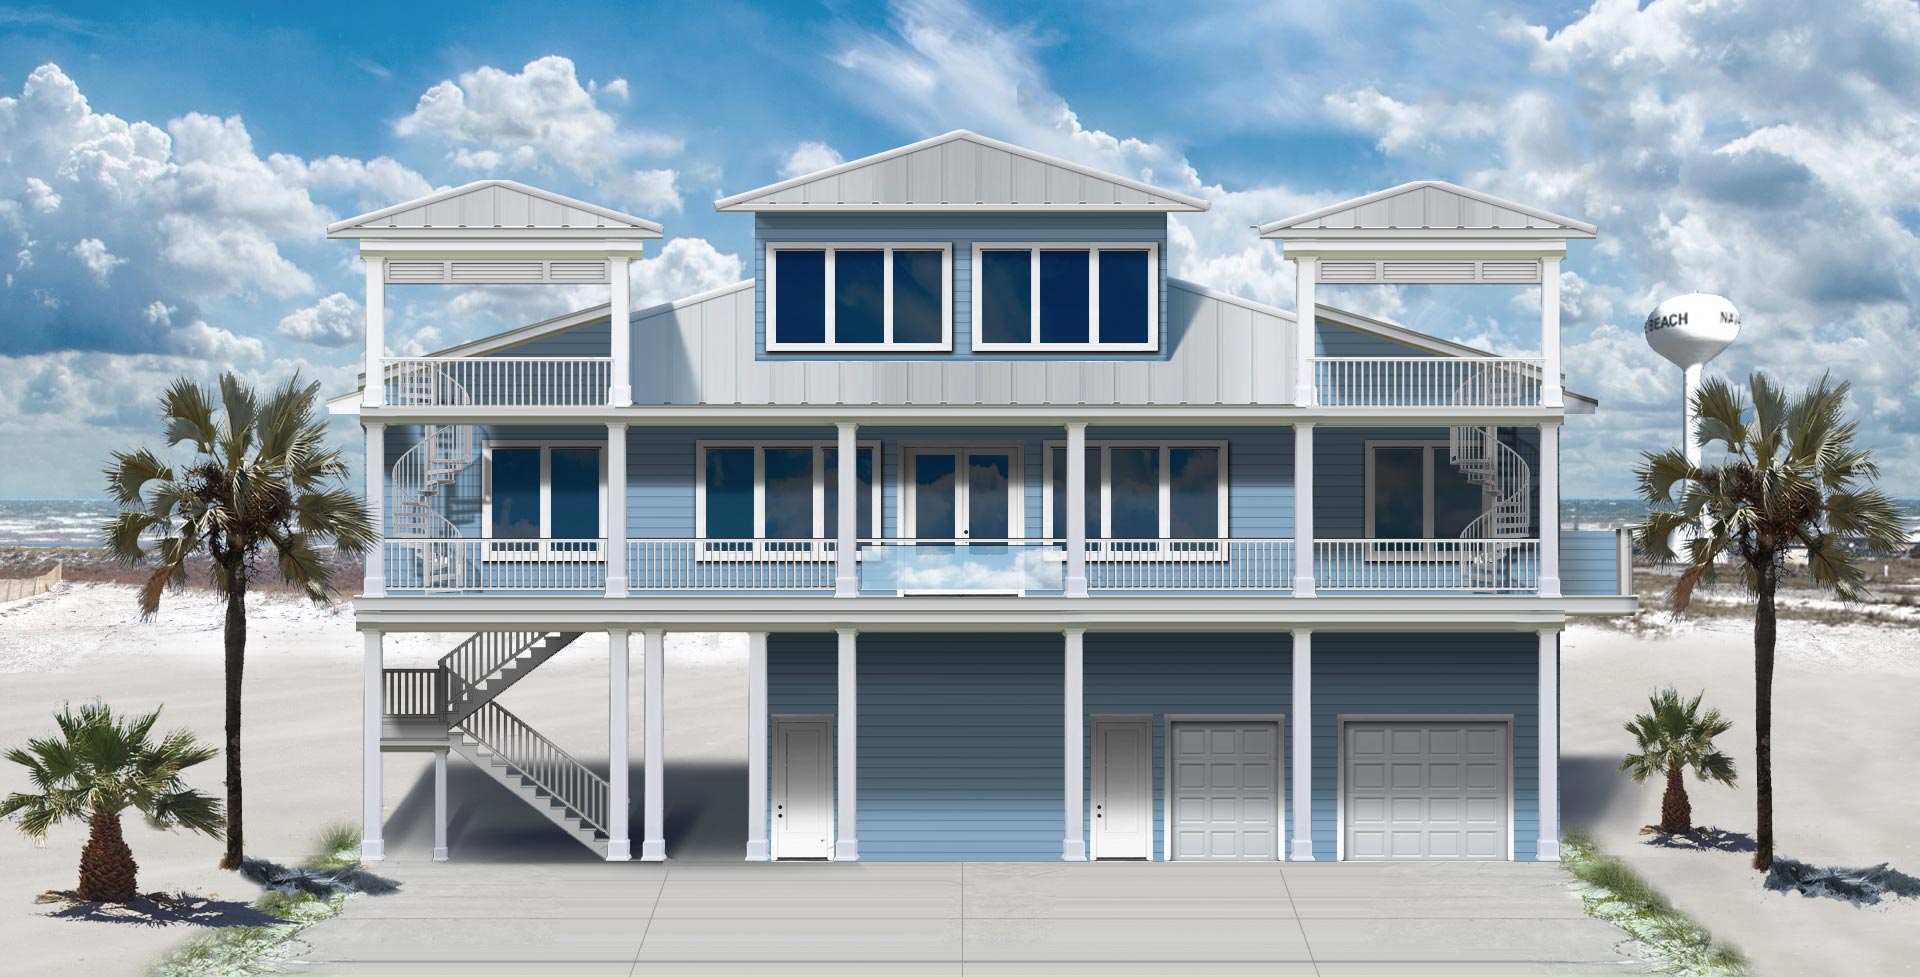 Florida beach house rendering from elevation plan.